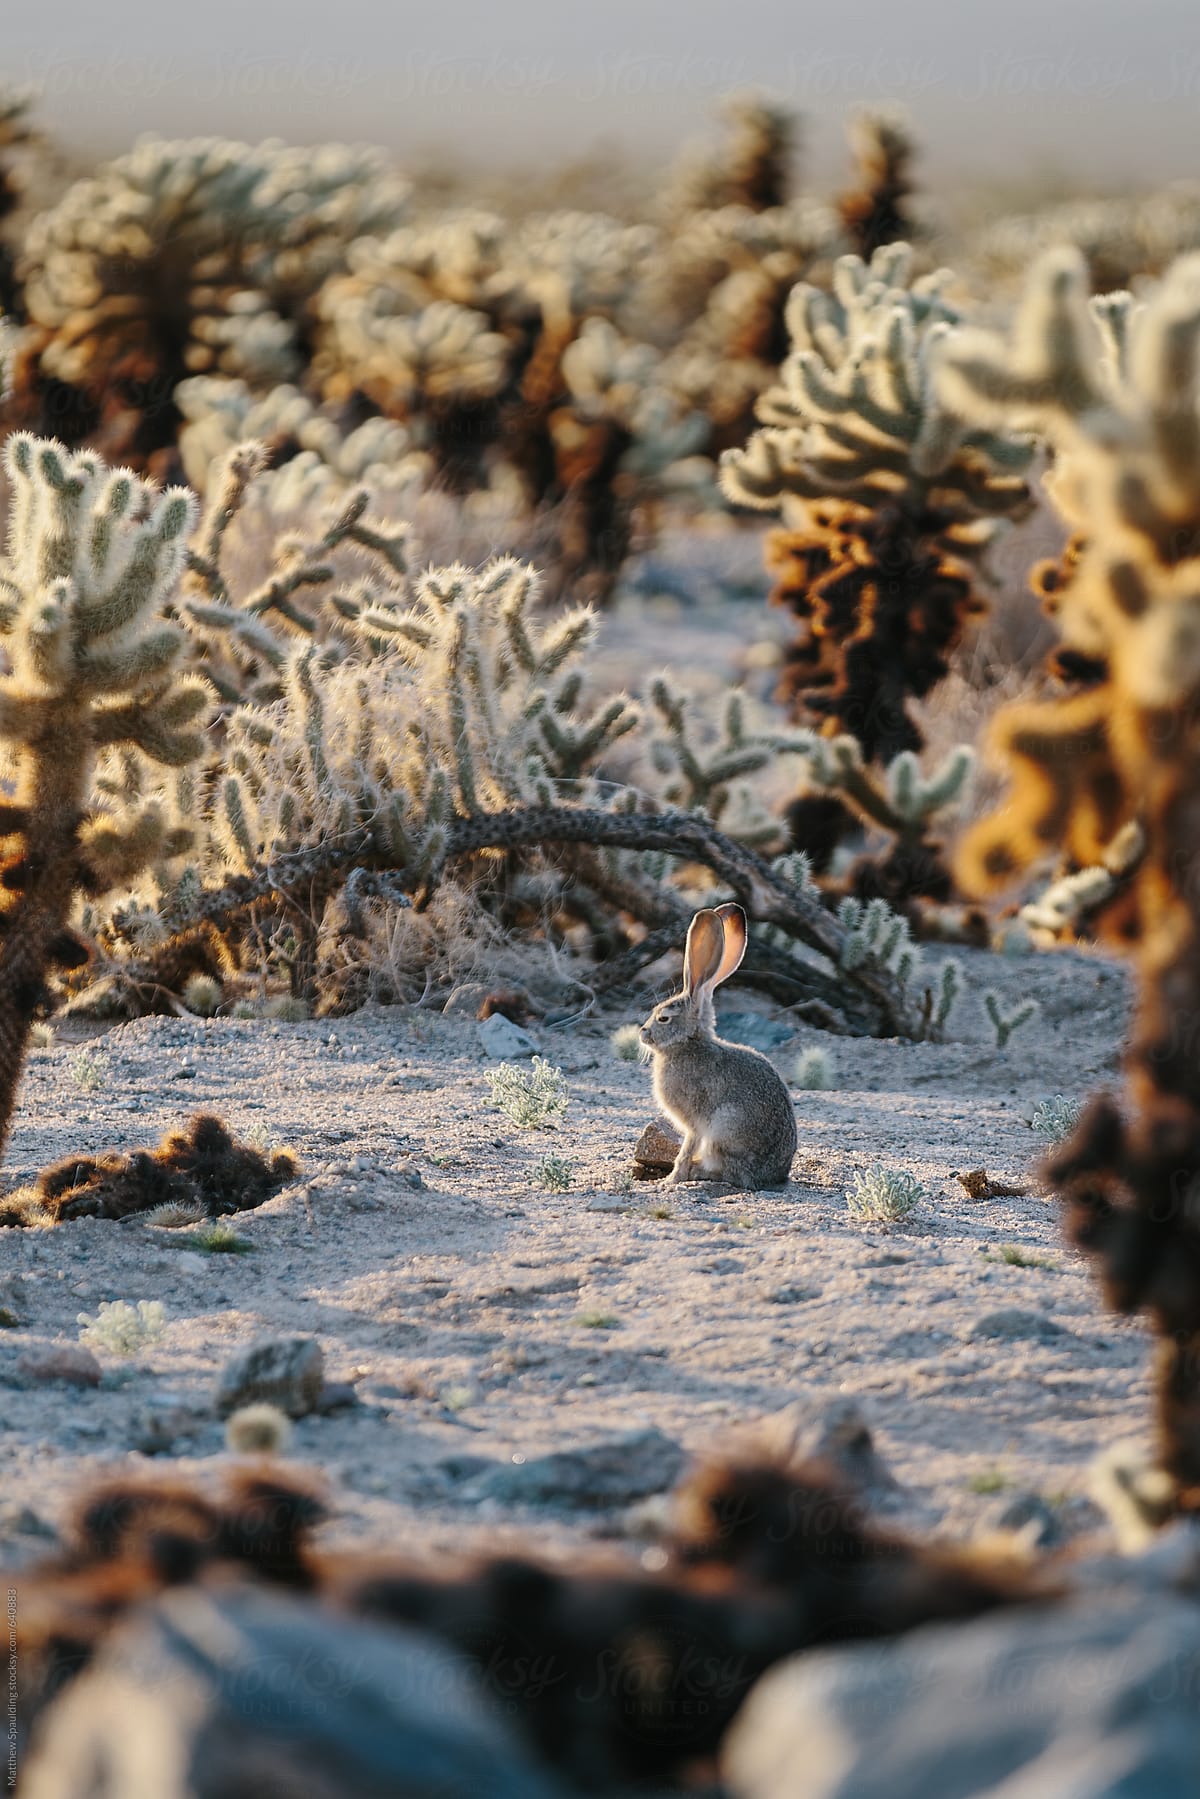 Desert rabbit among cactus with large ear adaptation for hot environment